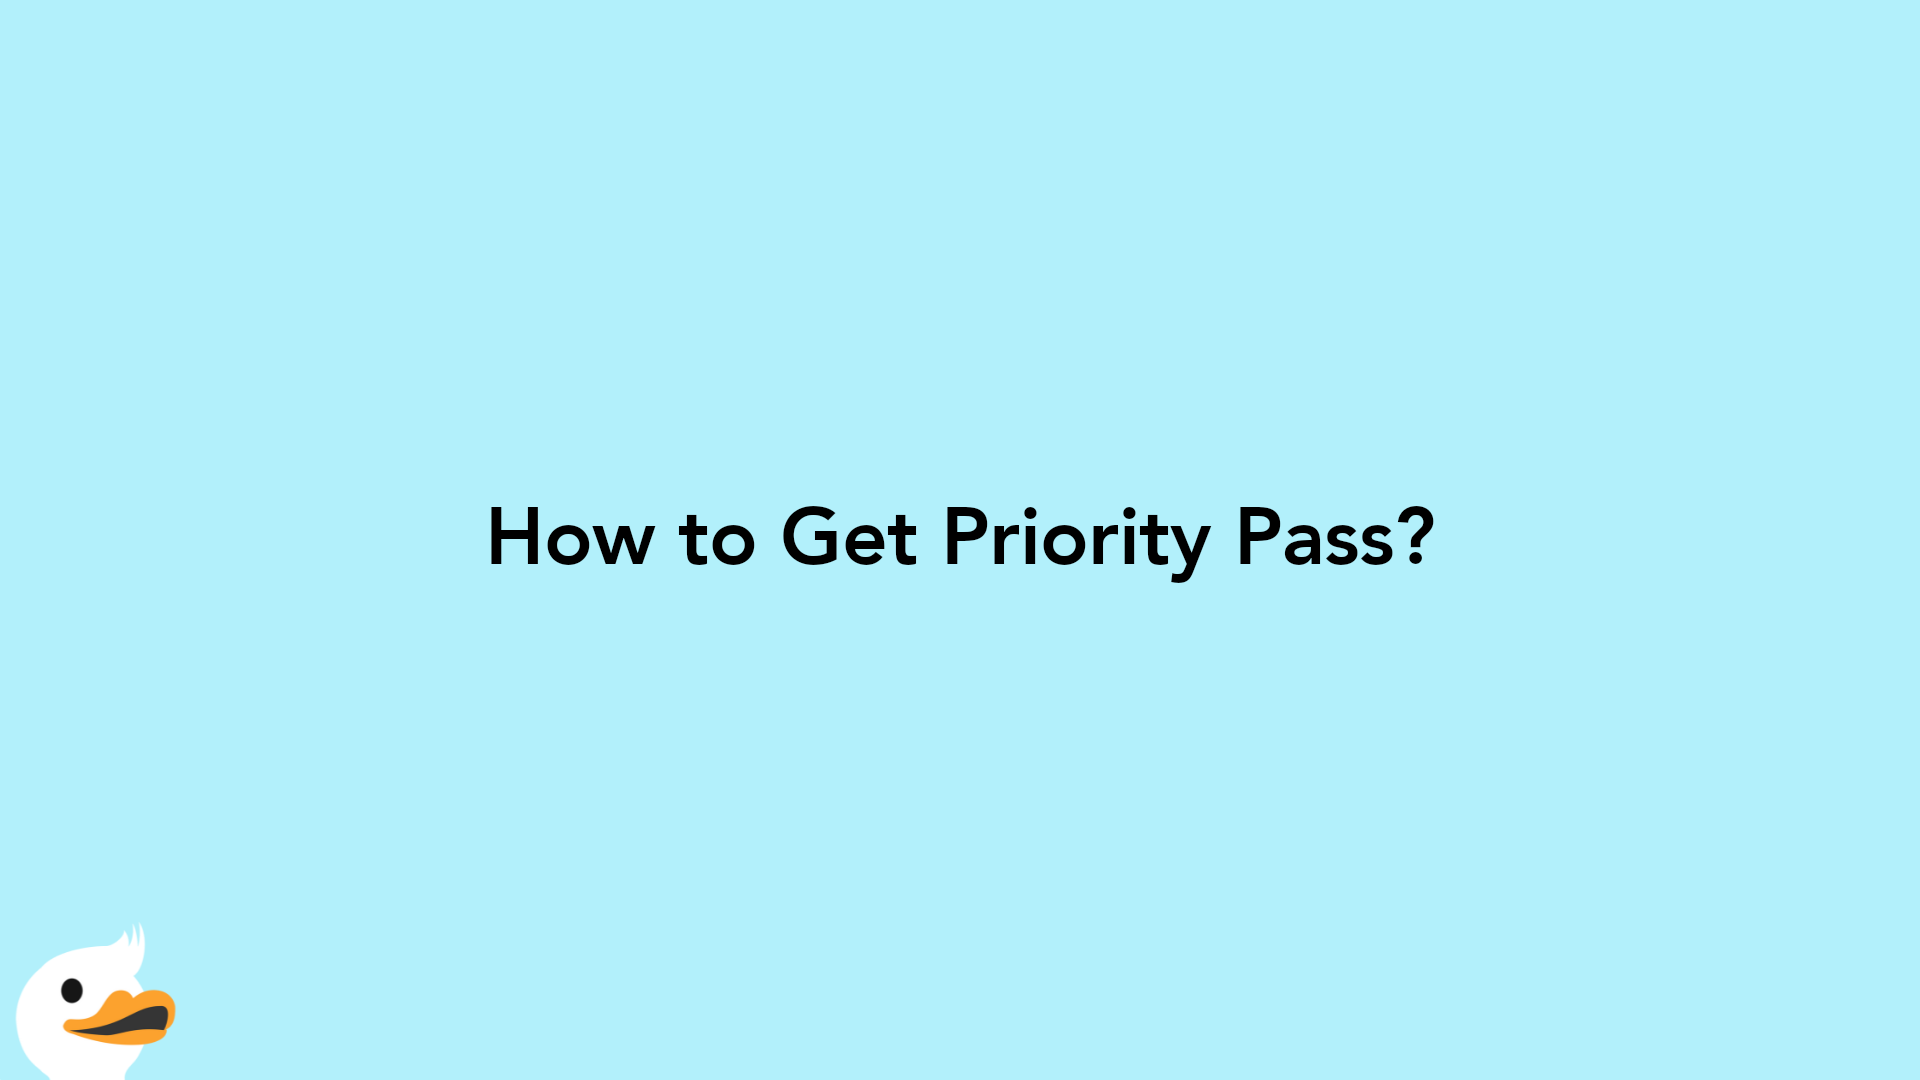 How to Get Priority Pass?